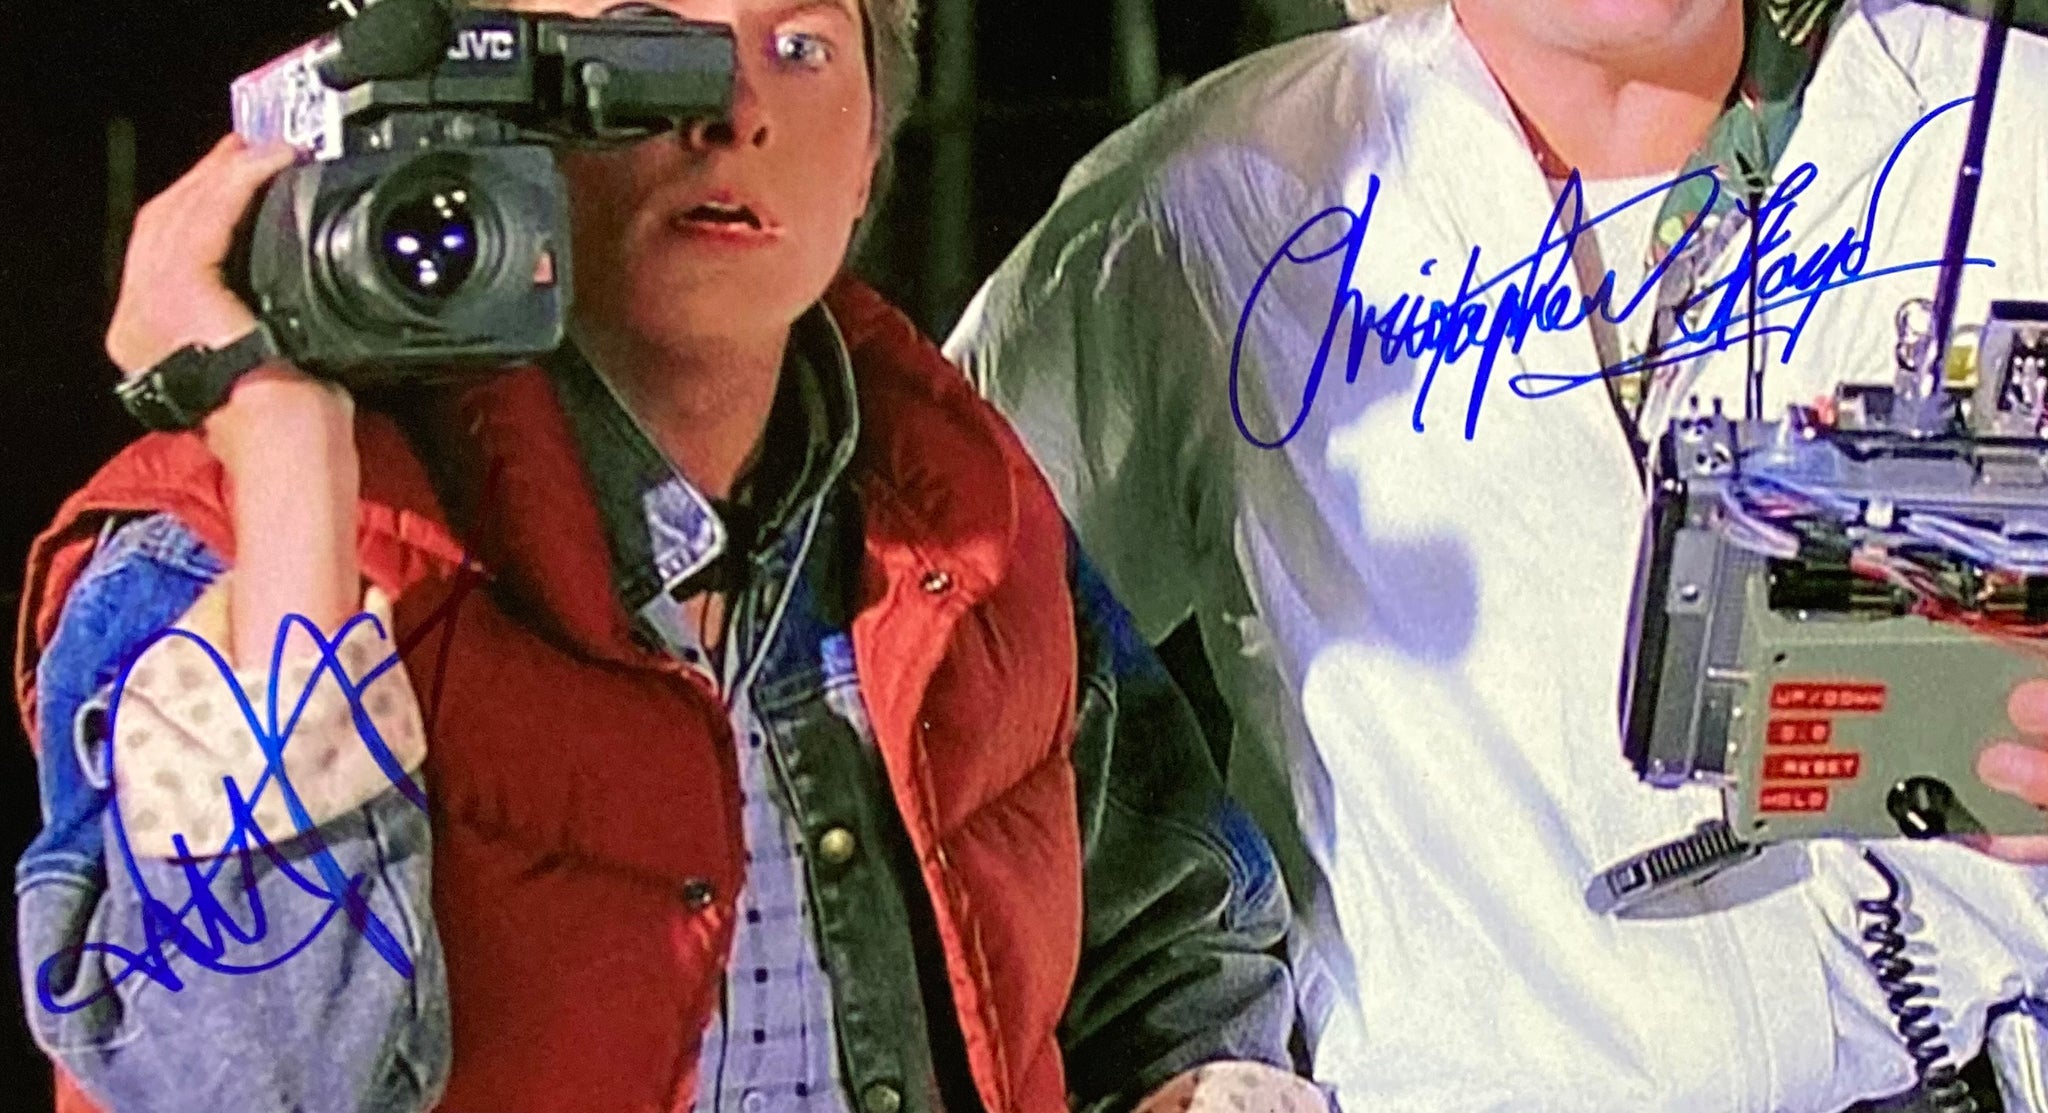 Michael J. Fox creates 'Back To The Future' goalie mask with